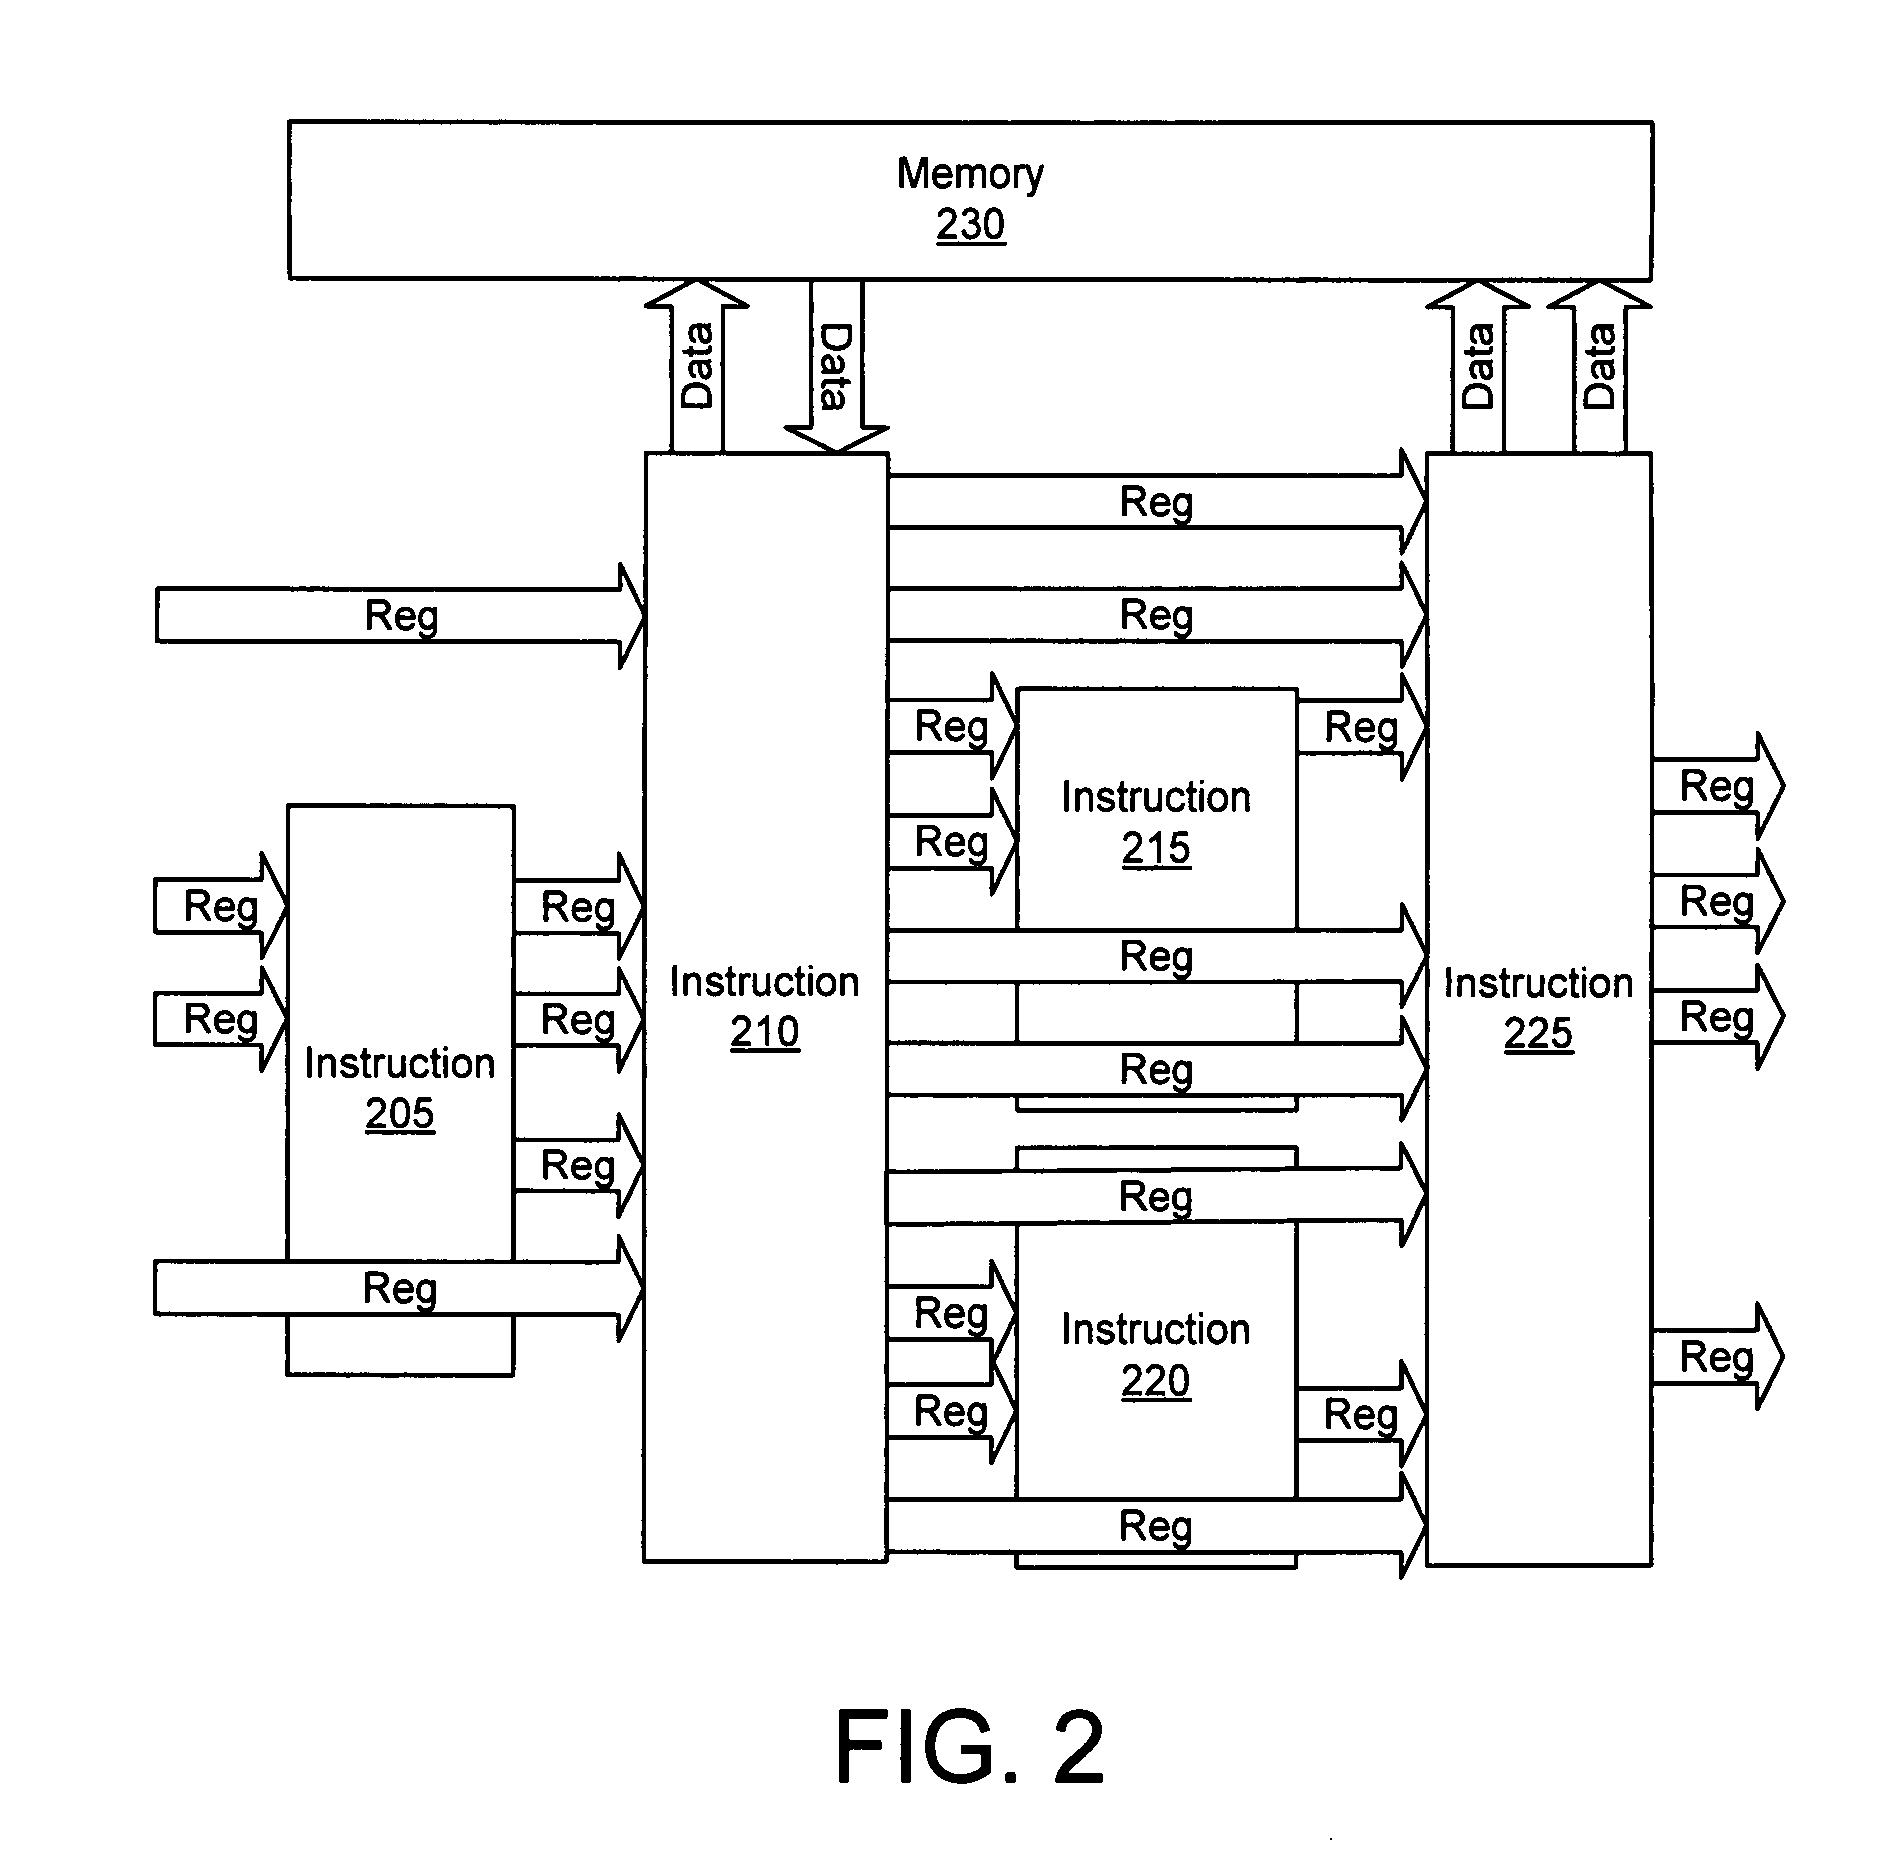 Profiling a hardware system generated by compiling a high level language onto a programmable logic device